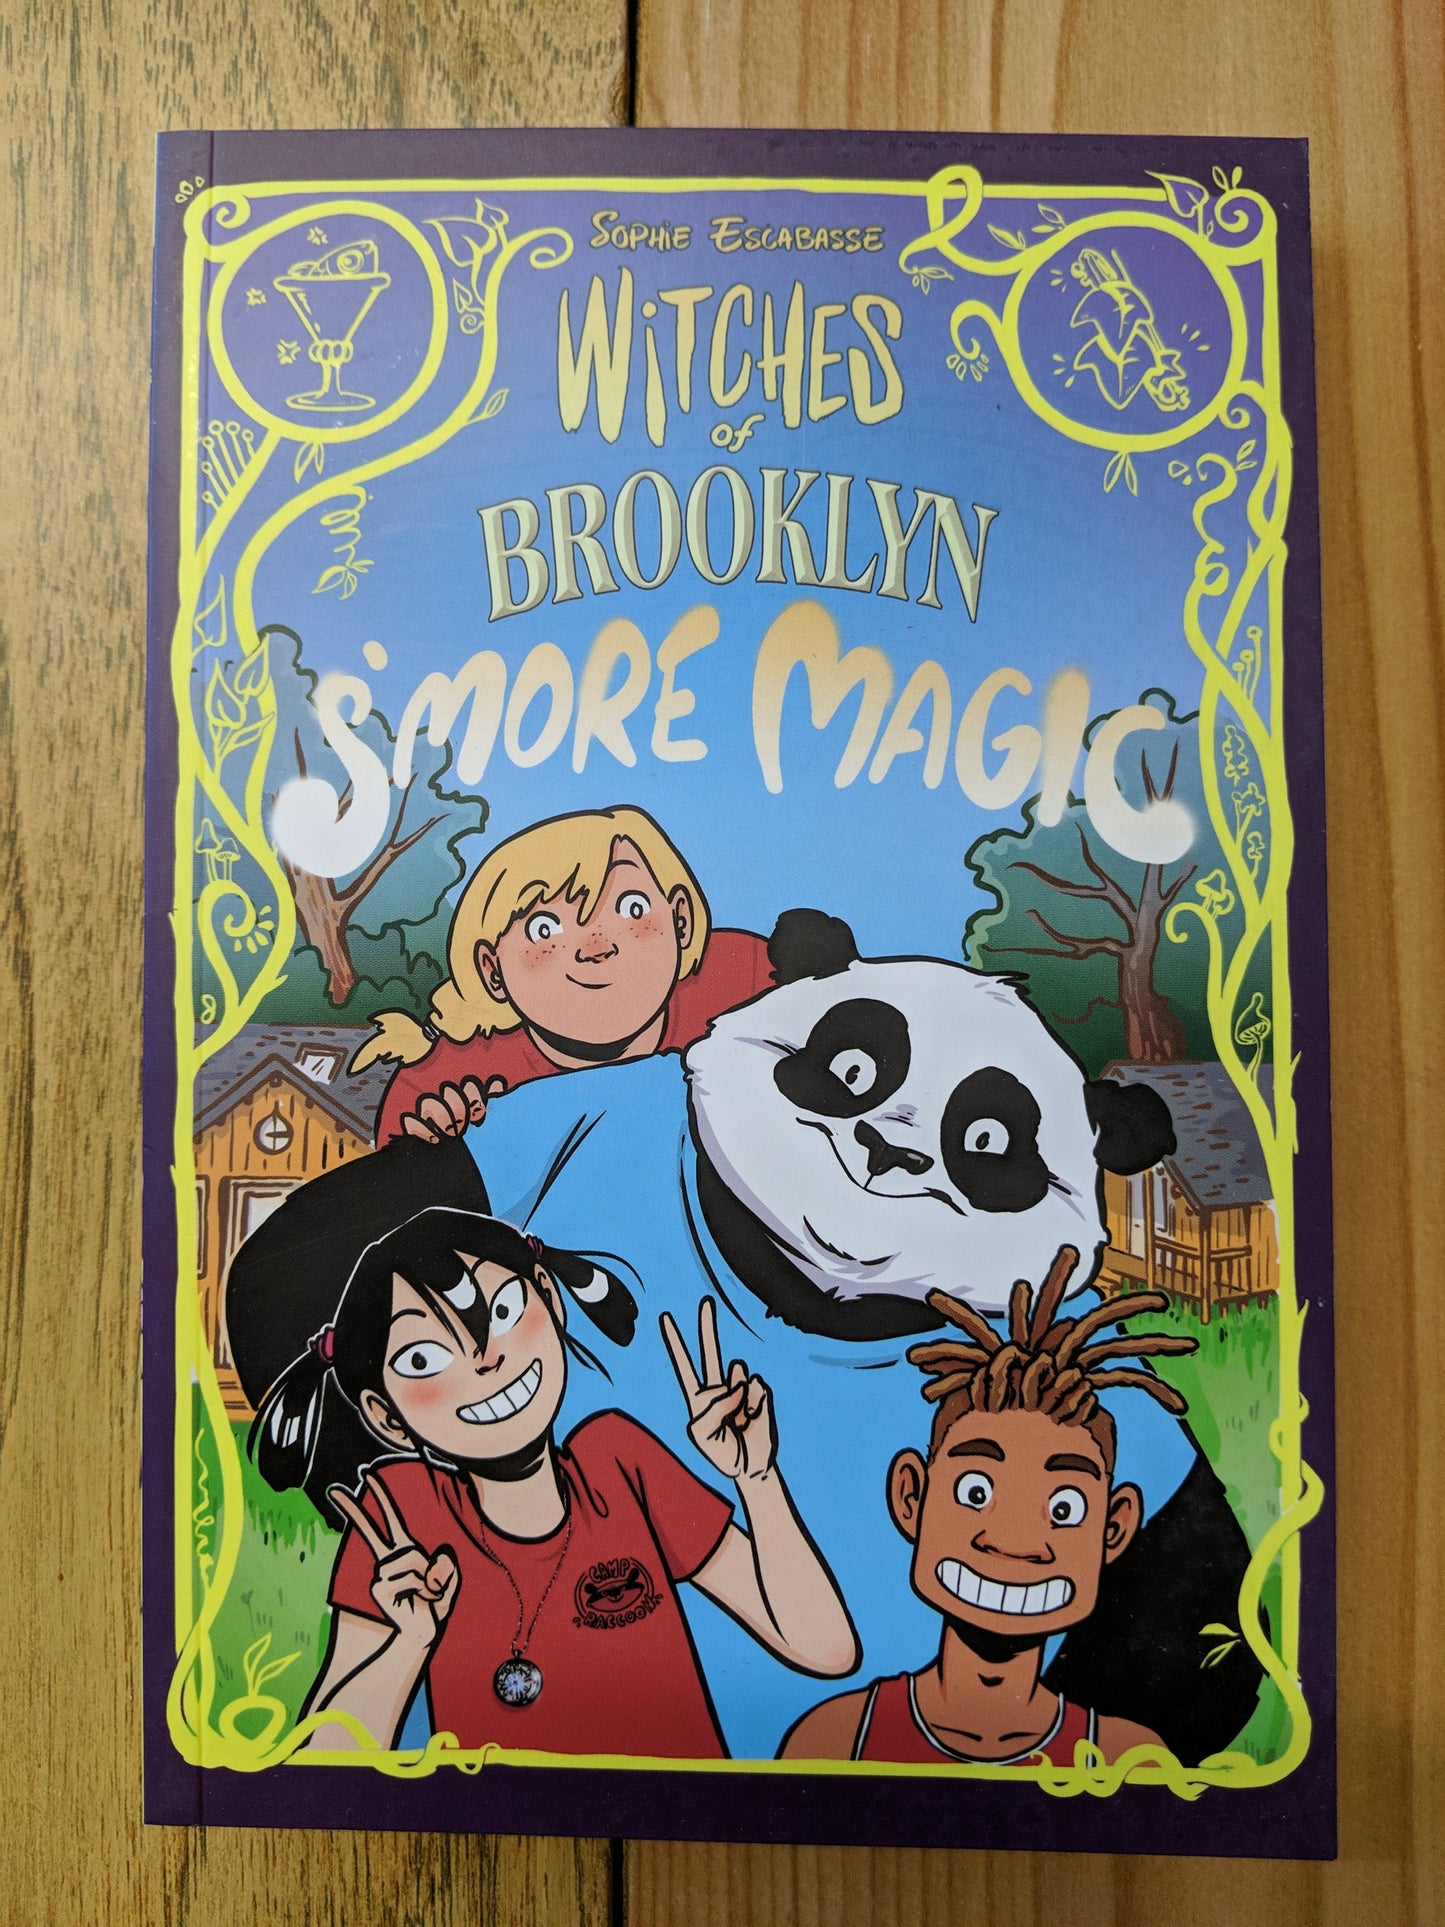 Witches of Brooklyn: S'more Magic (#3)